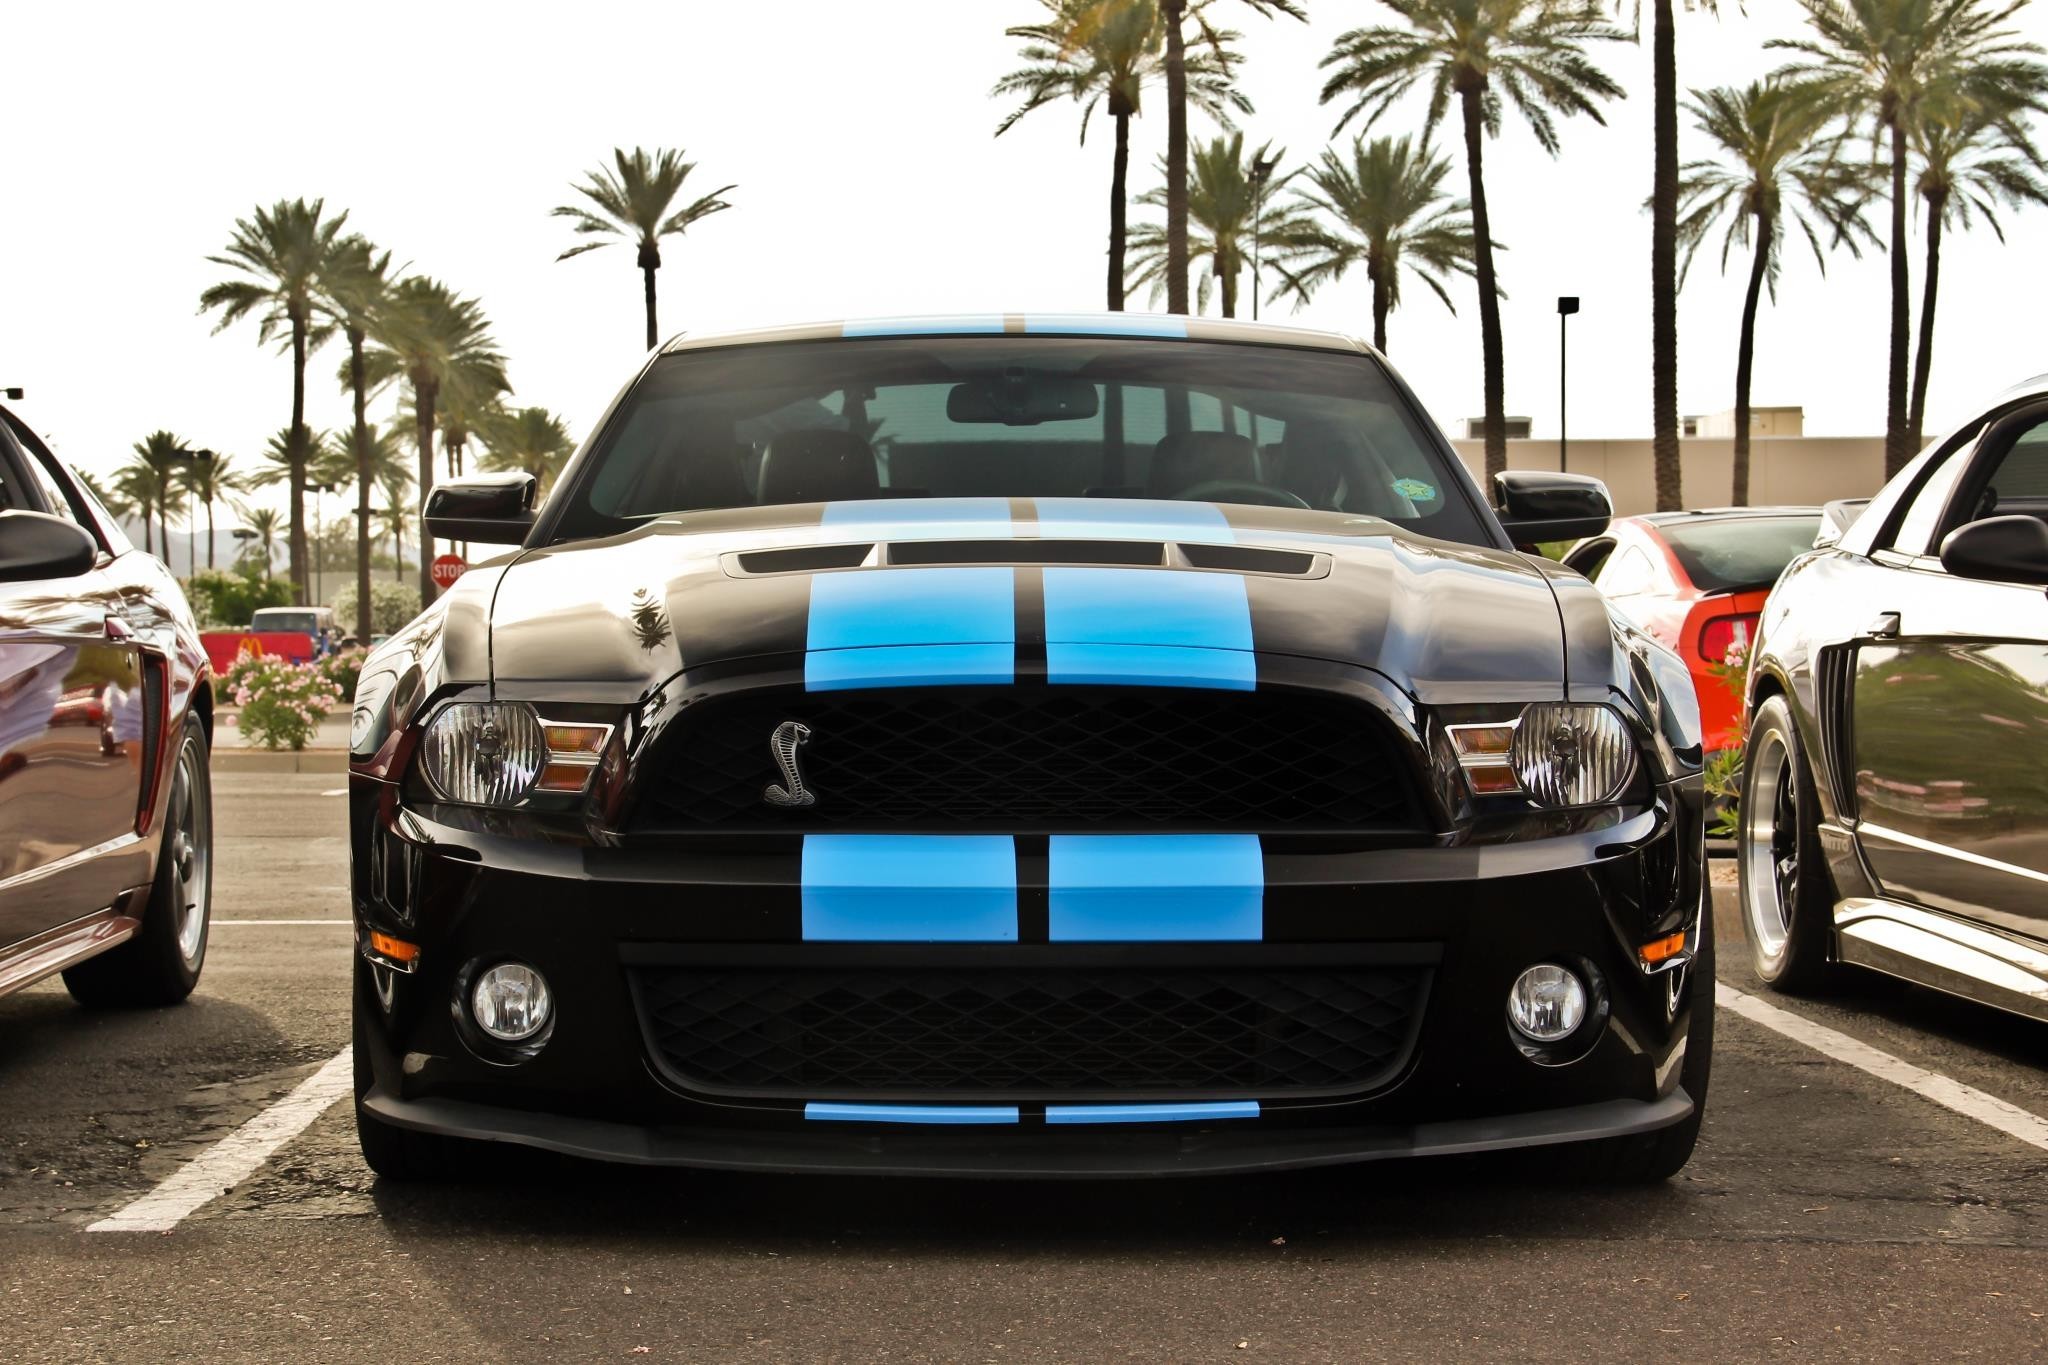 Ford Mustang, Muscle Cars, Blue Stripes, Black Paint, Shelby GT Wallpaper